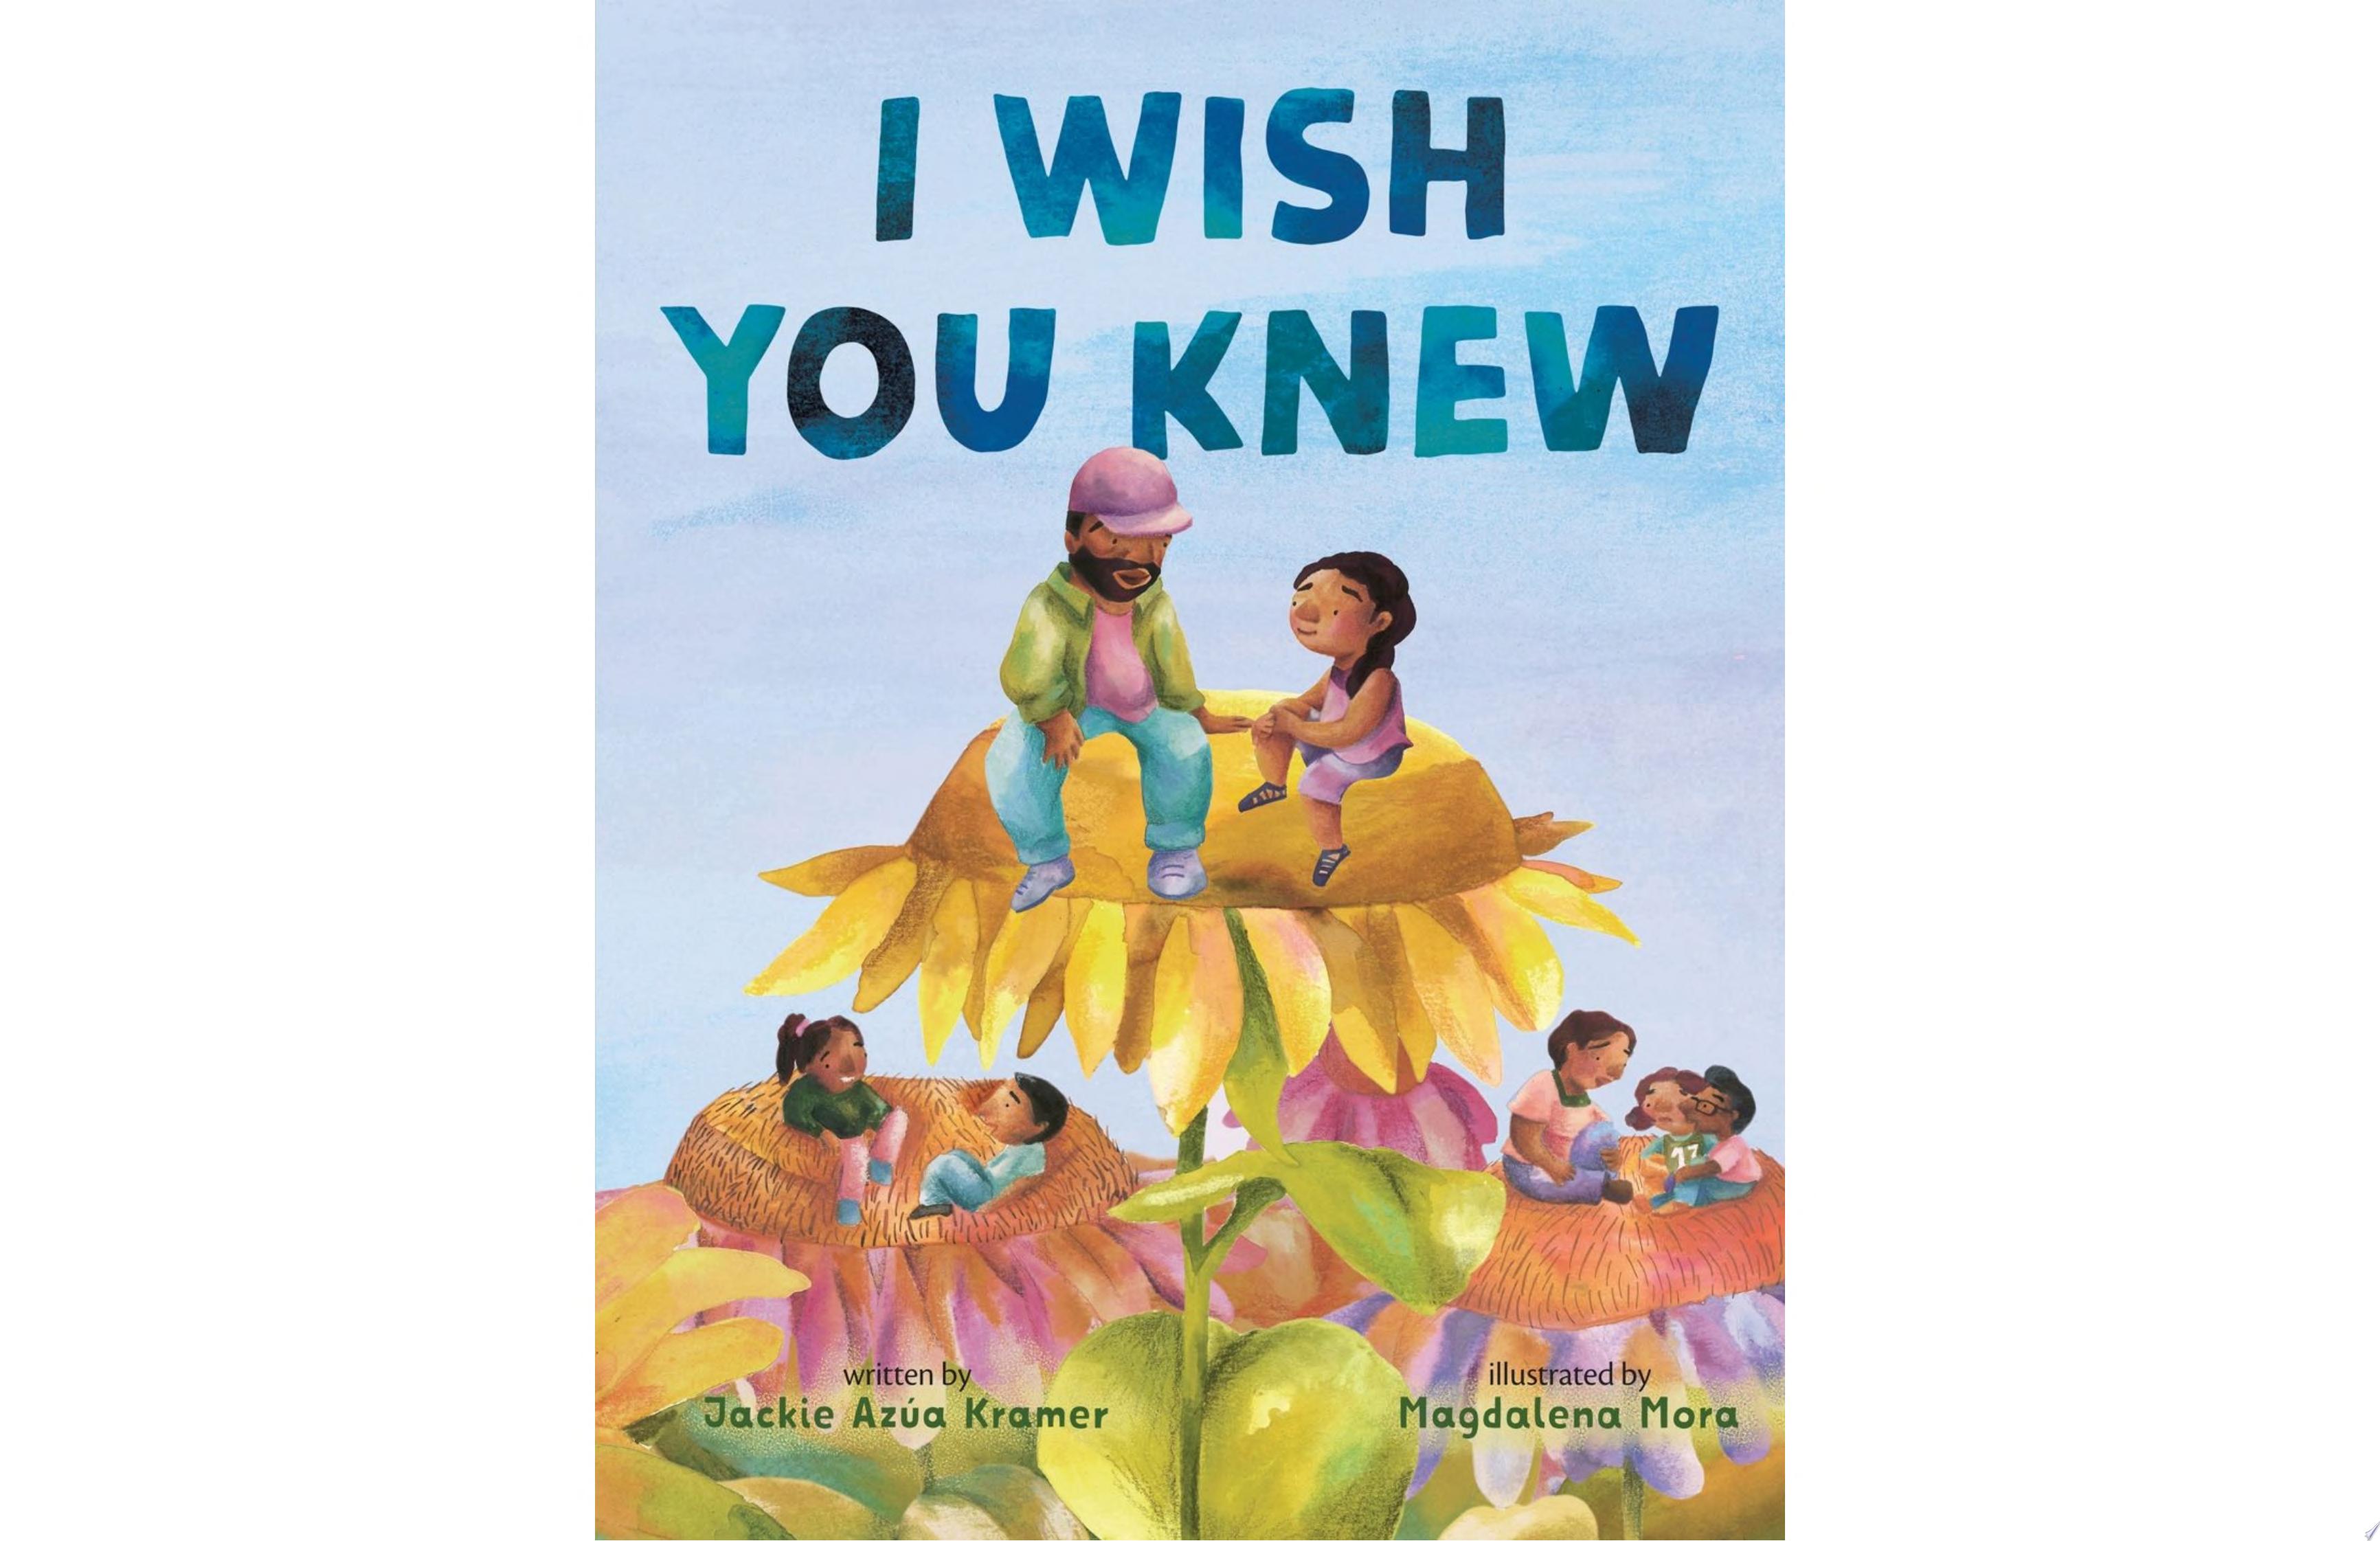 Image for "I Wish You Knew"